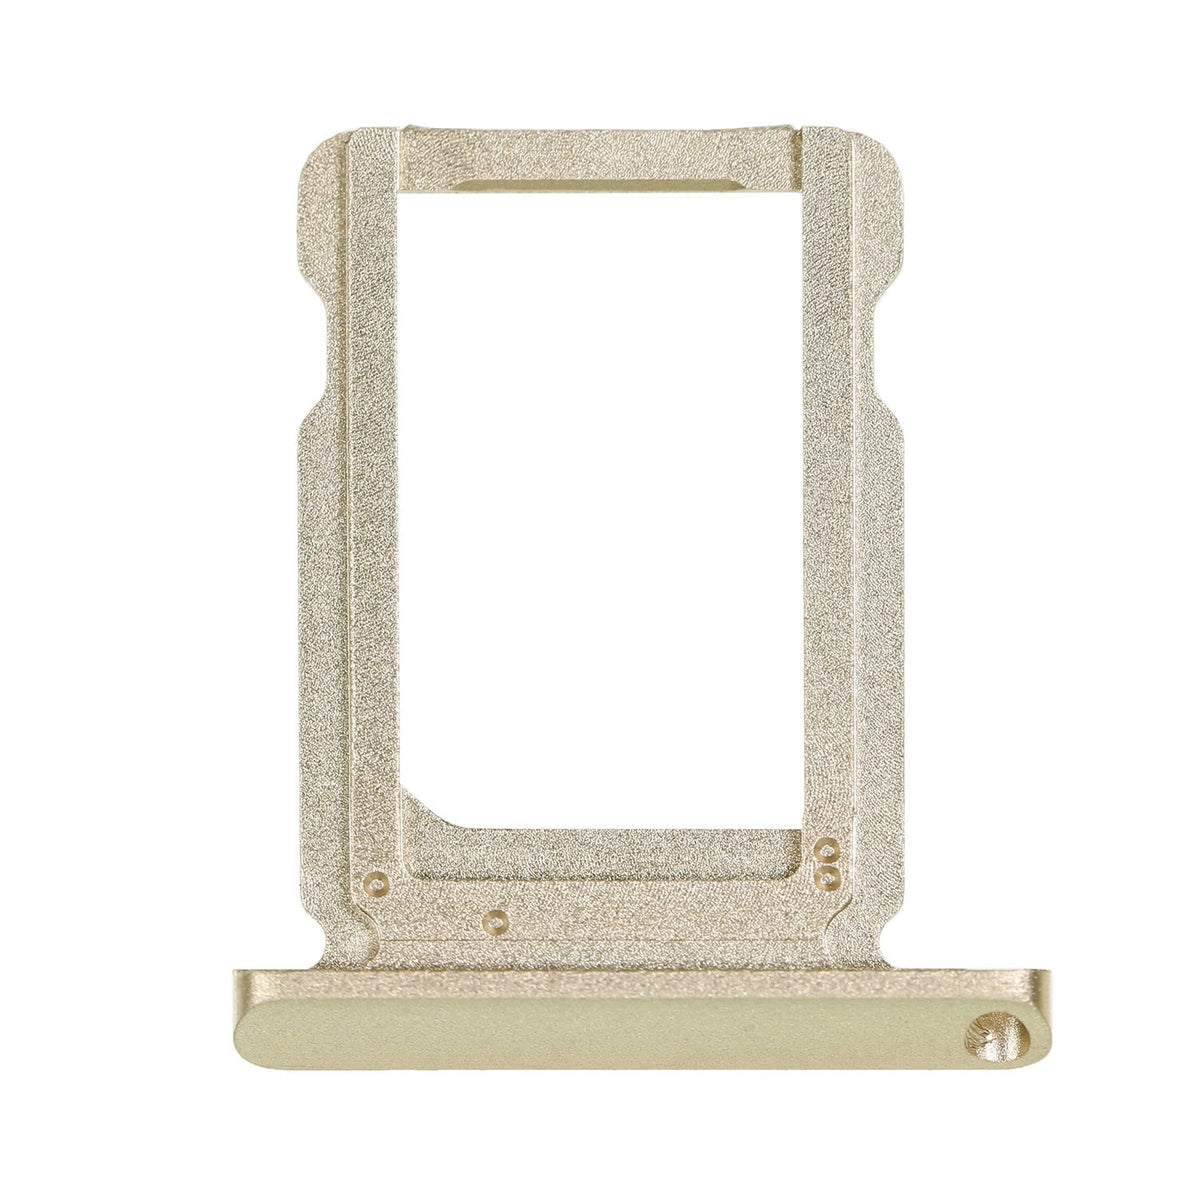 SIM CARD TRAY FOR IPAD 12.9 2ND GEN- GOLD